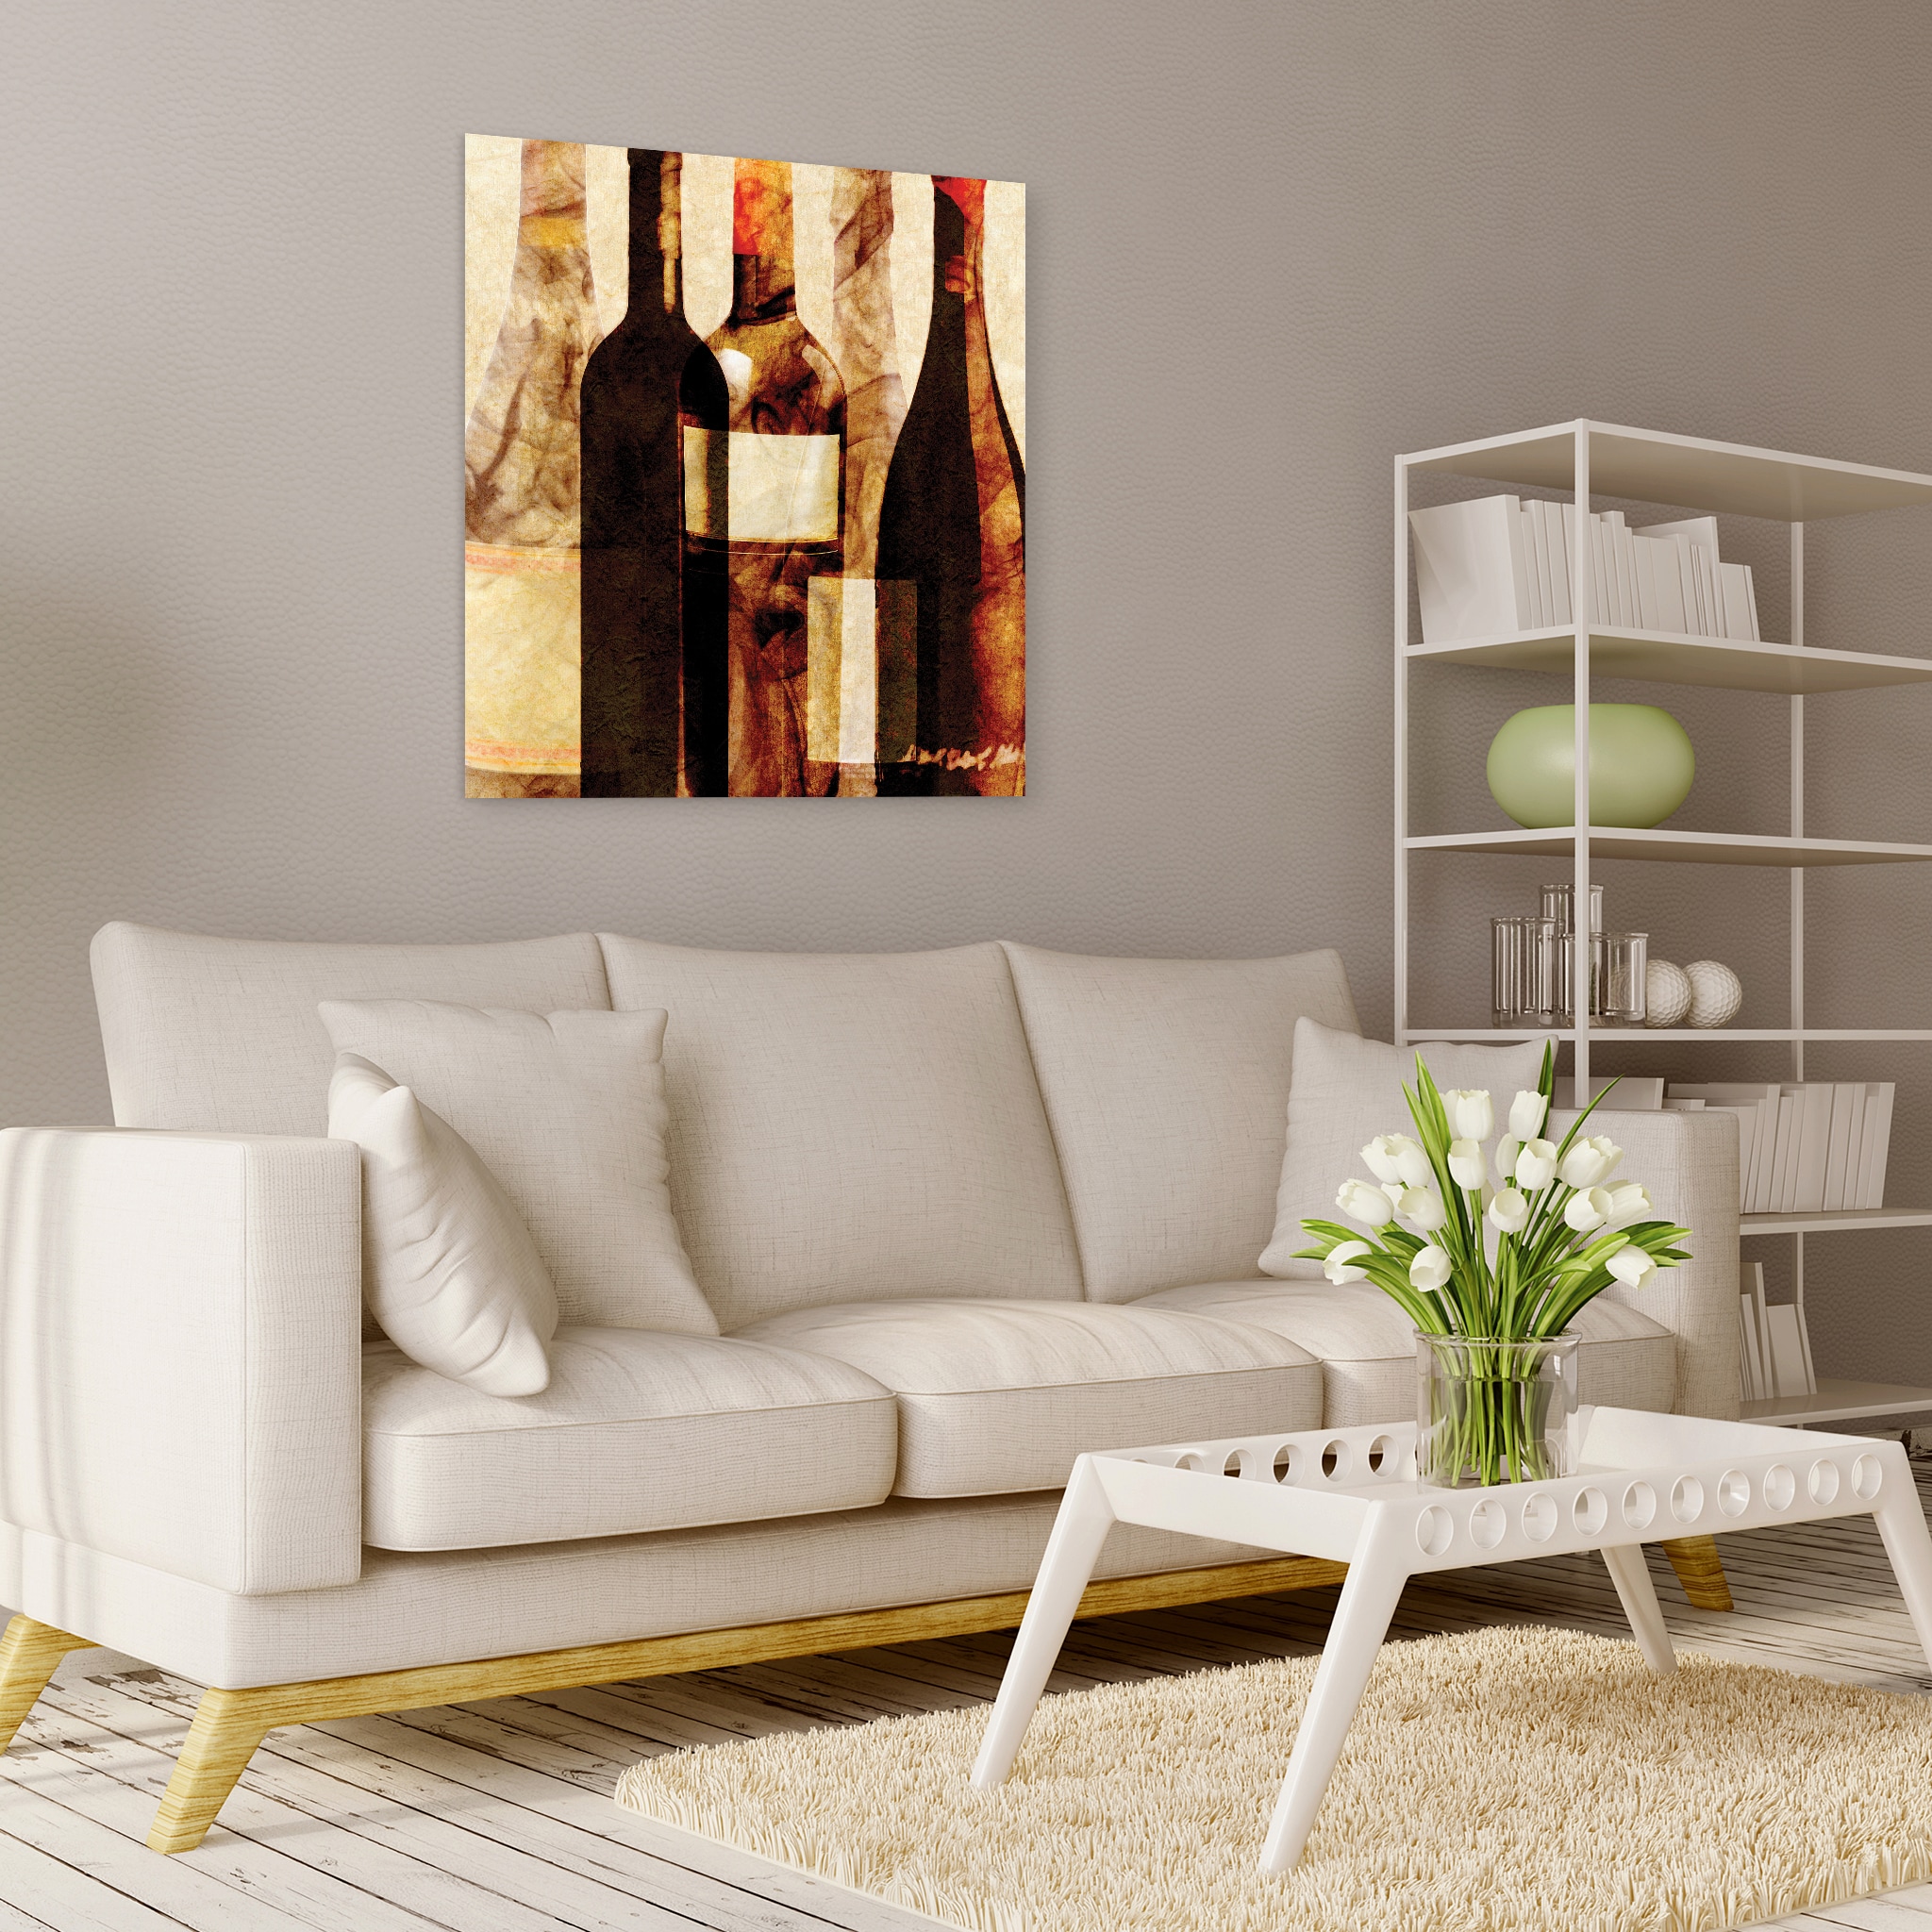 Empire Art Direct 38-in H x 38-in W Modern Glass Print in the Wall Art ...